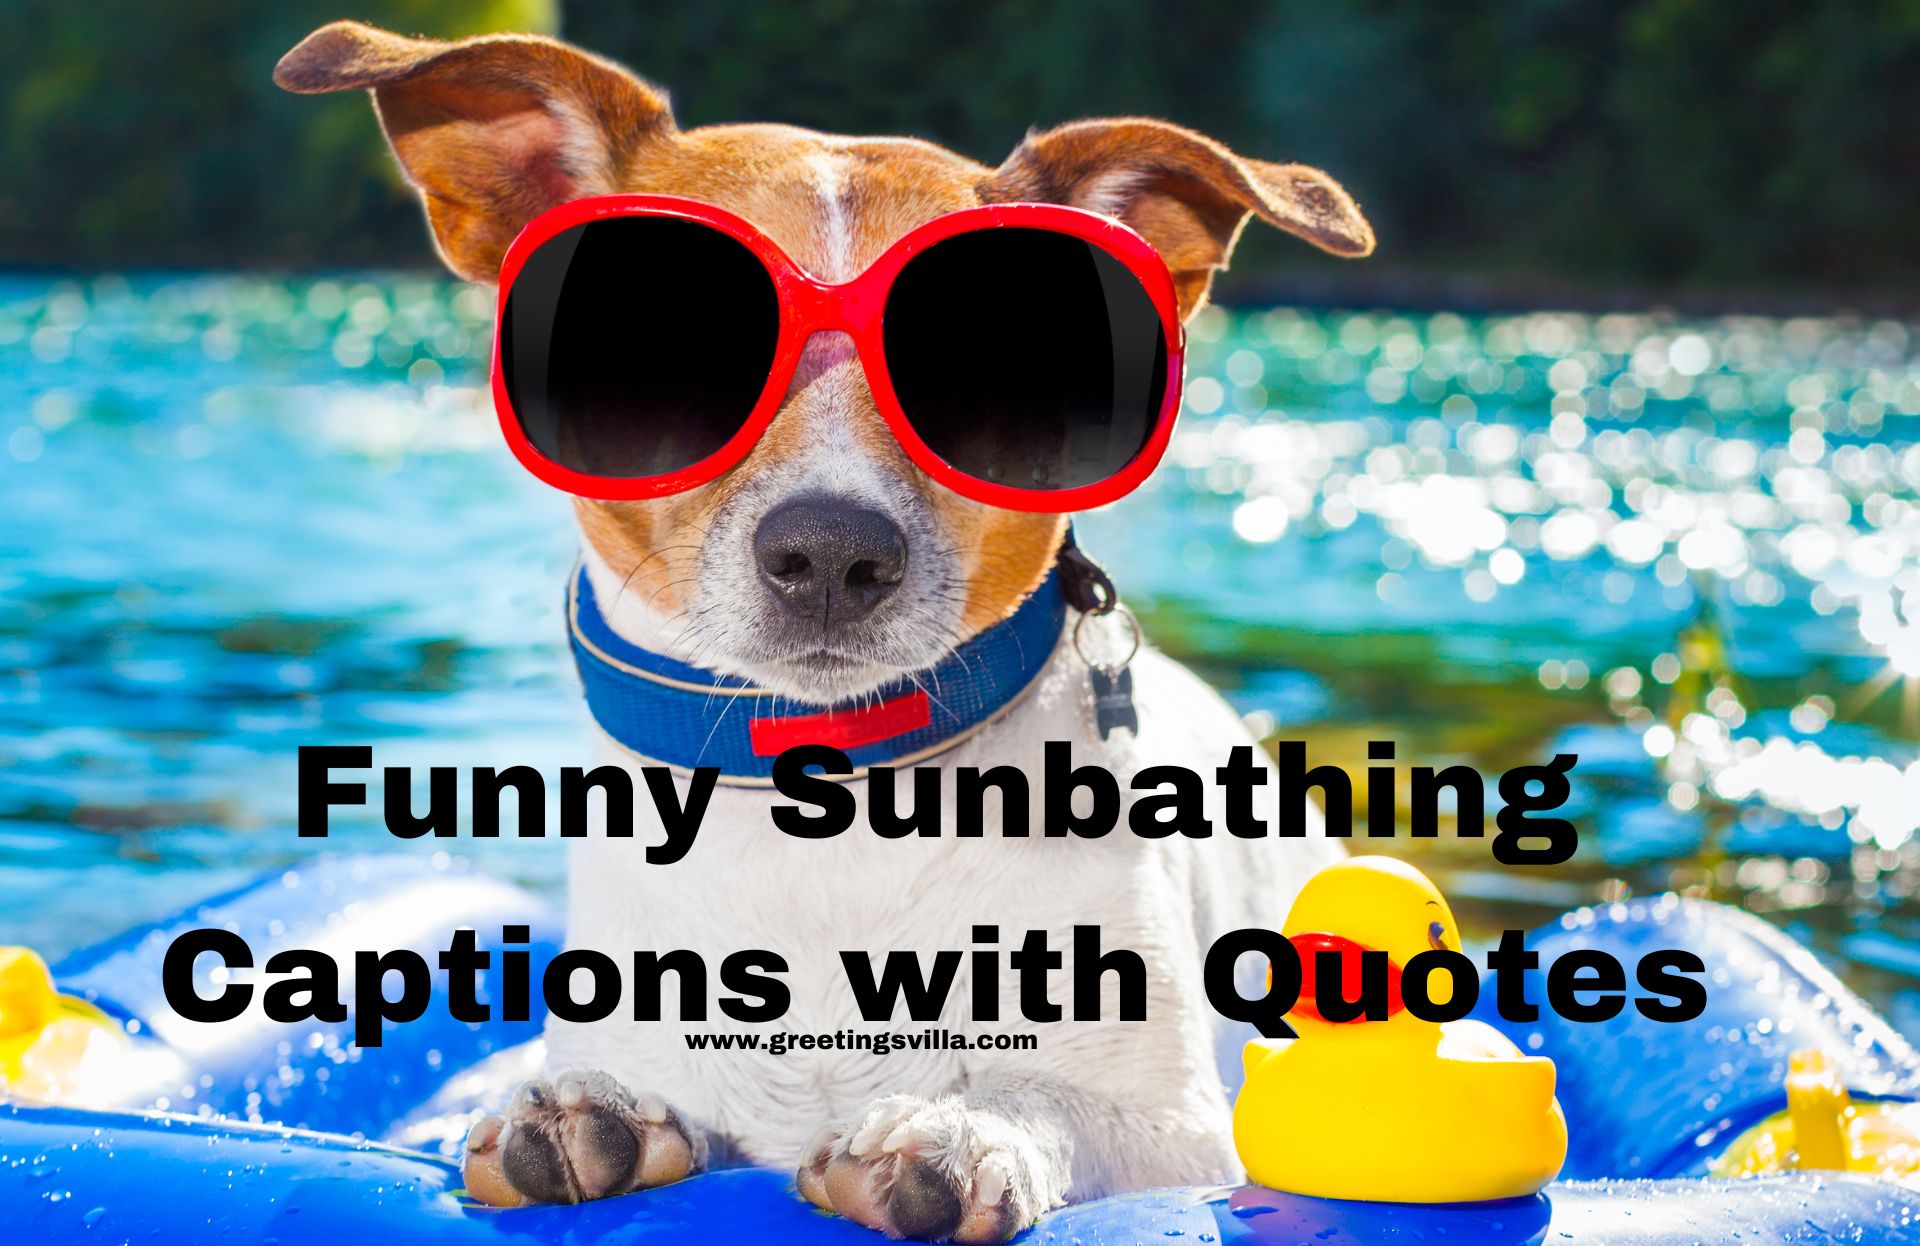 Funny Sunbathing Captions with Quotes